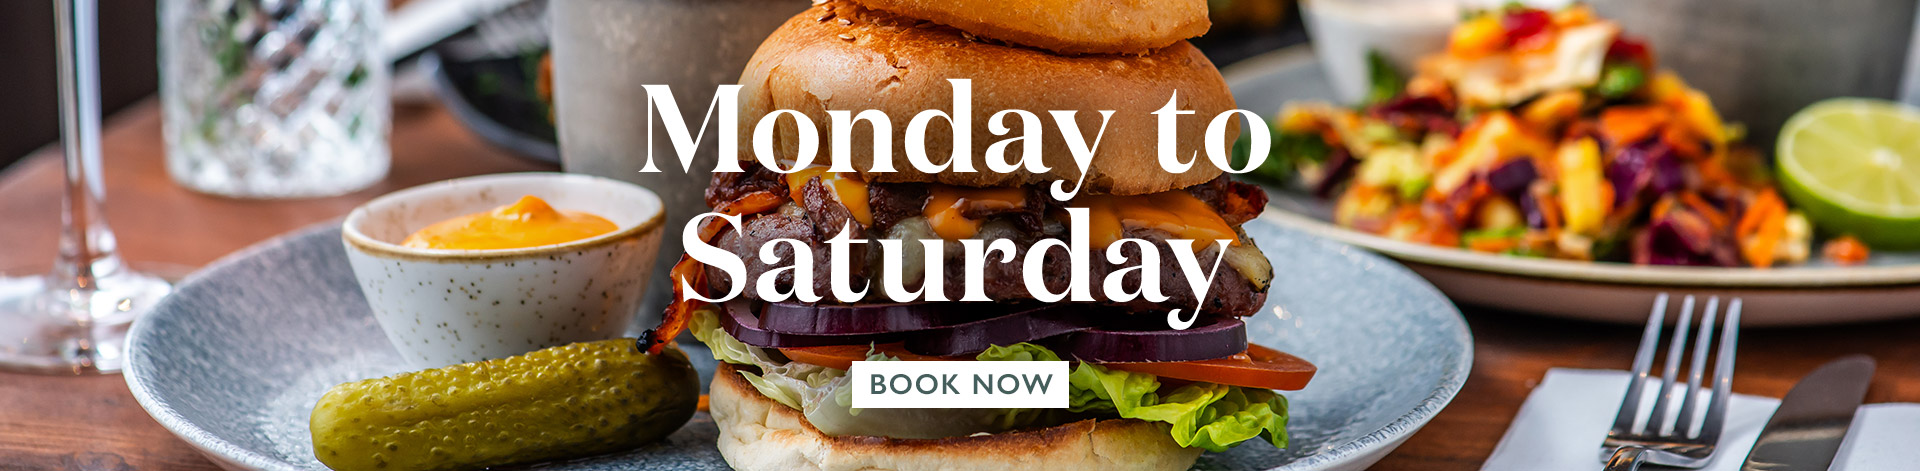 Book now at The Priory